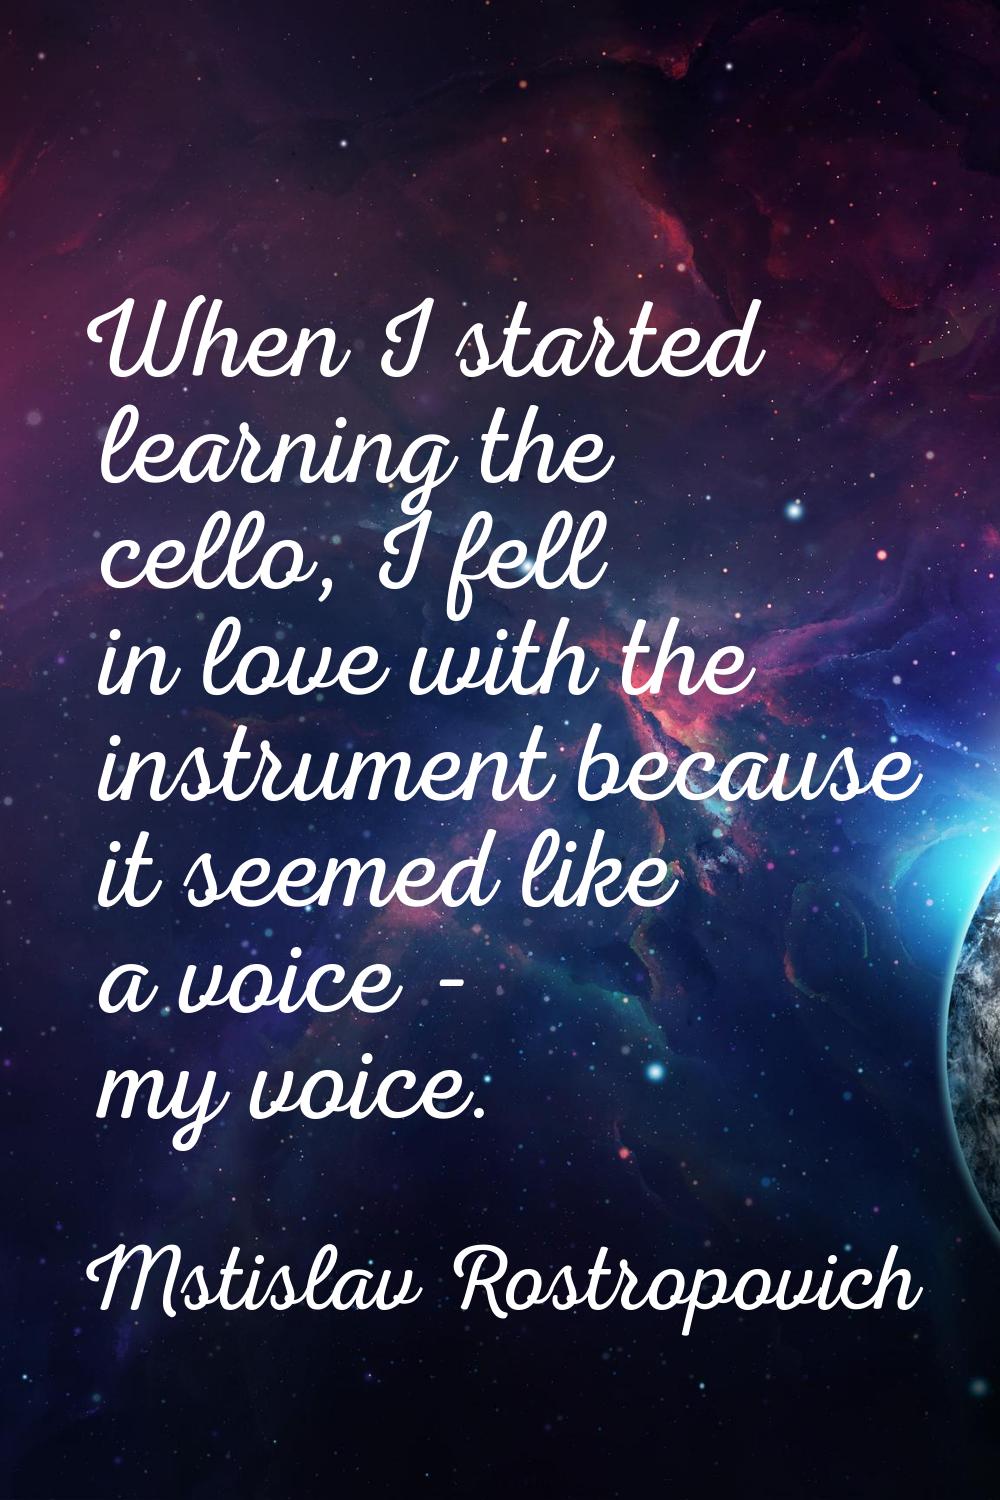 When I started learning the cello, I fell in love with the instrument because it seemed like a voic